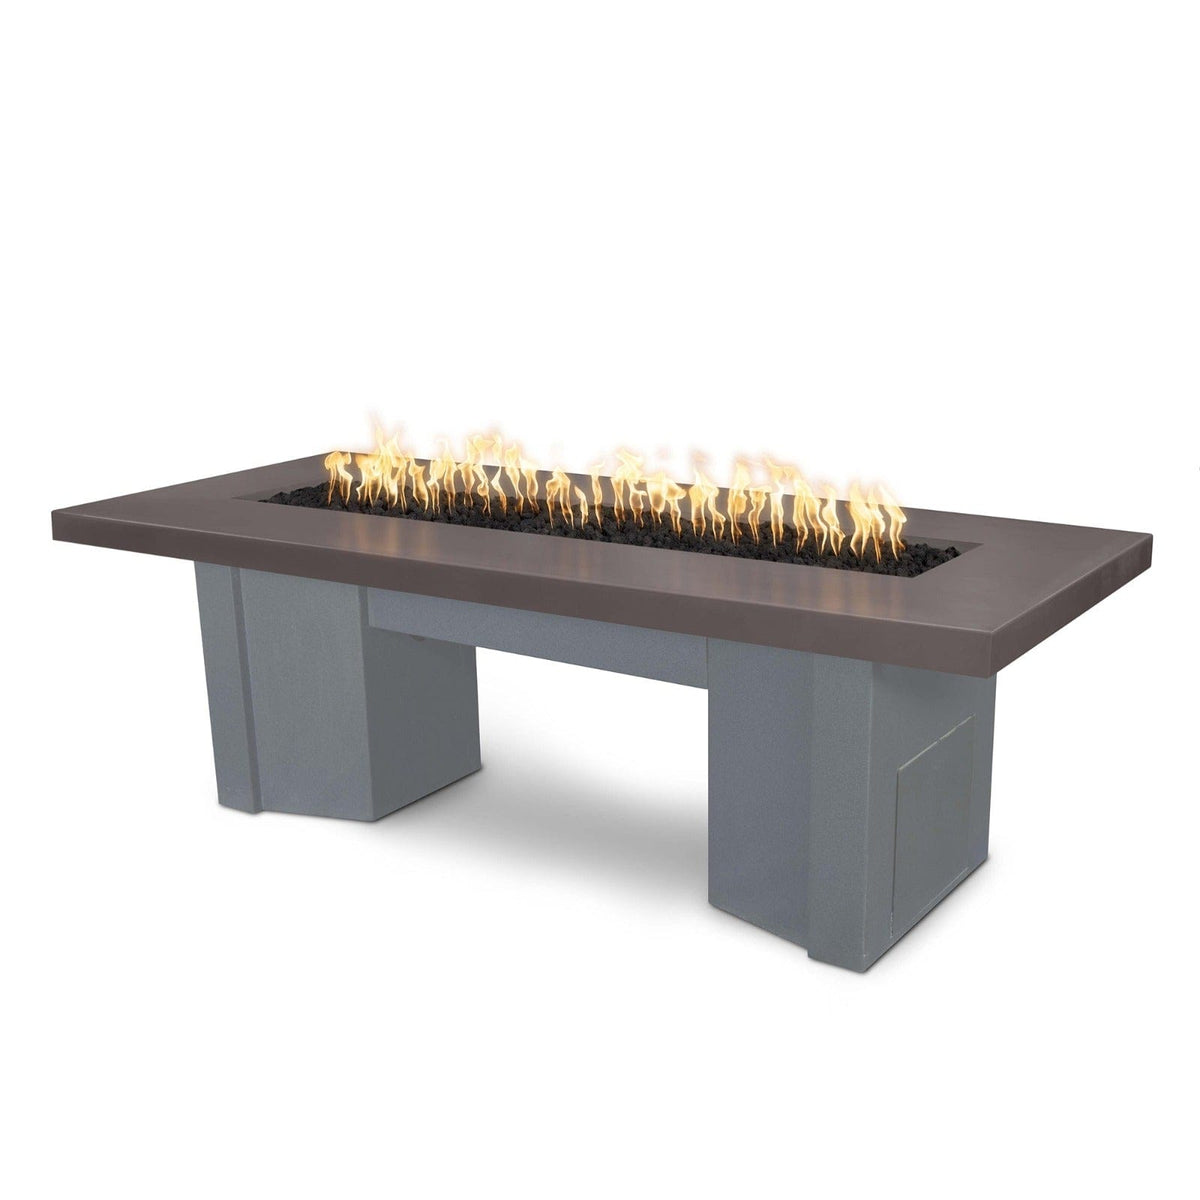 The Outdoor Plus Fire Features Chestnut (-CST) / Gray Powder Coated Steel (-GRY) The Outdoor Plus 60&quot; Alameda Fire Table Smooth Concrete in Liquid Propane - Match Lit / OPT-ALMGFRC60-LP